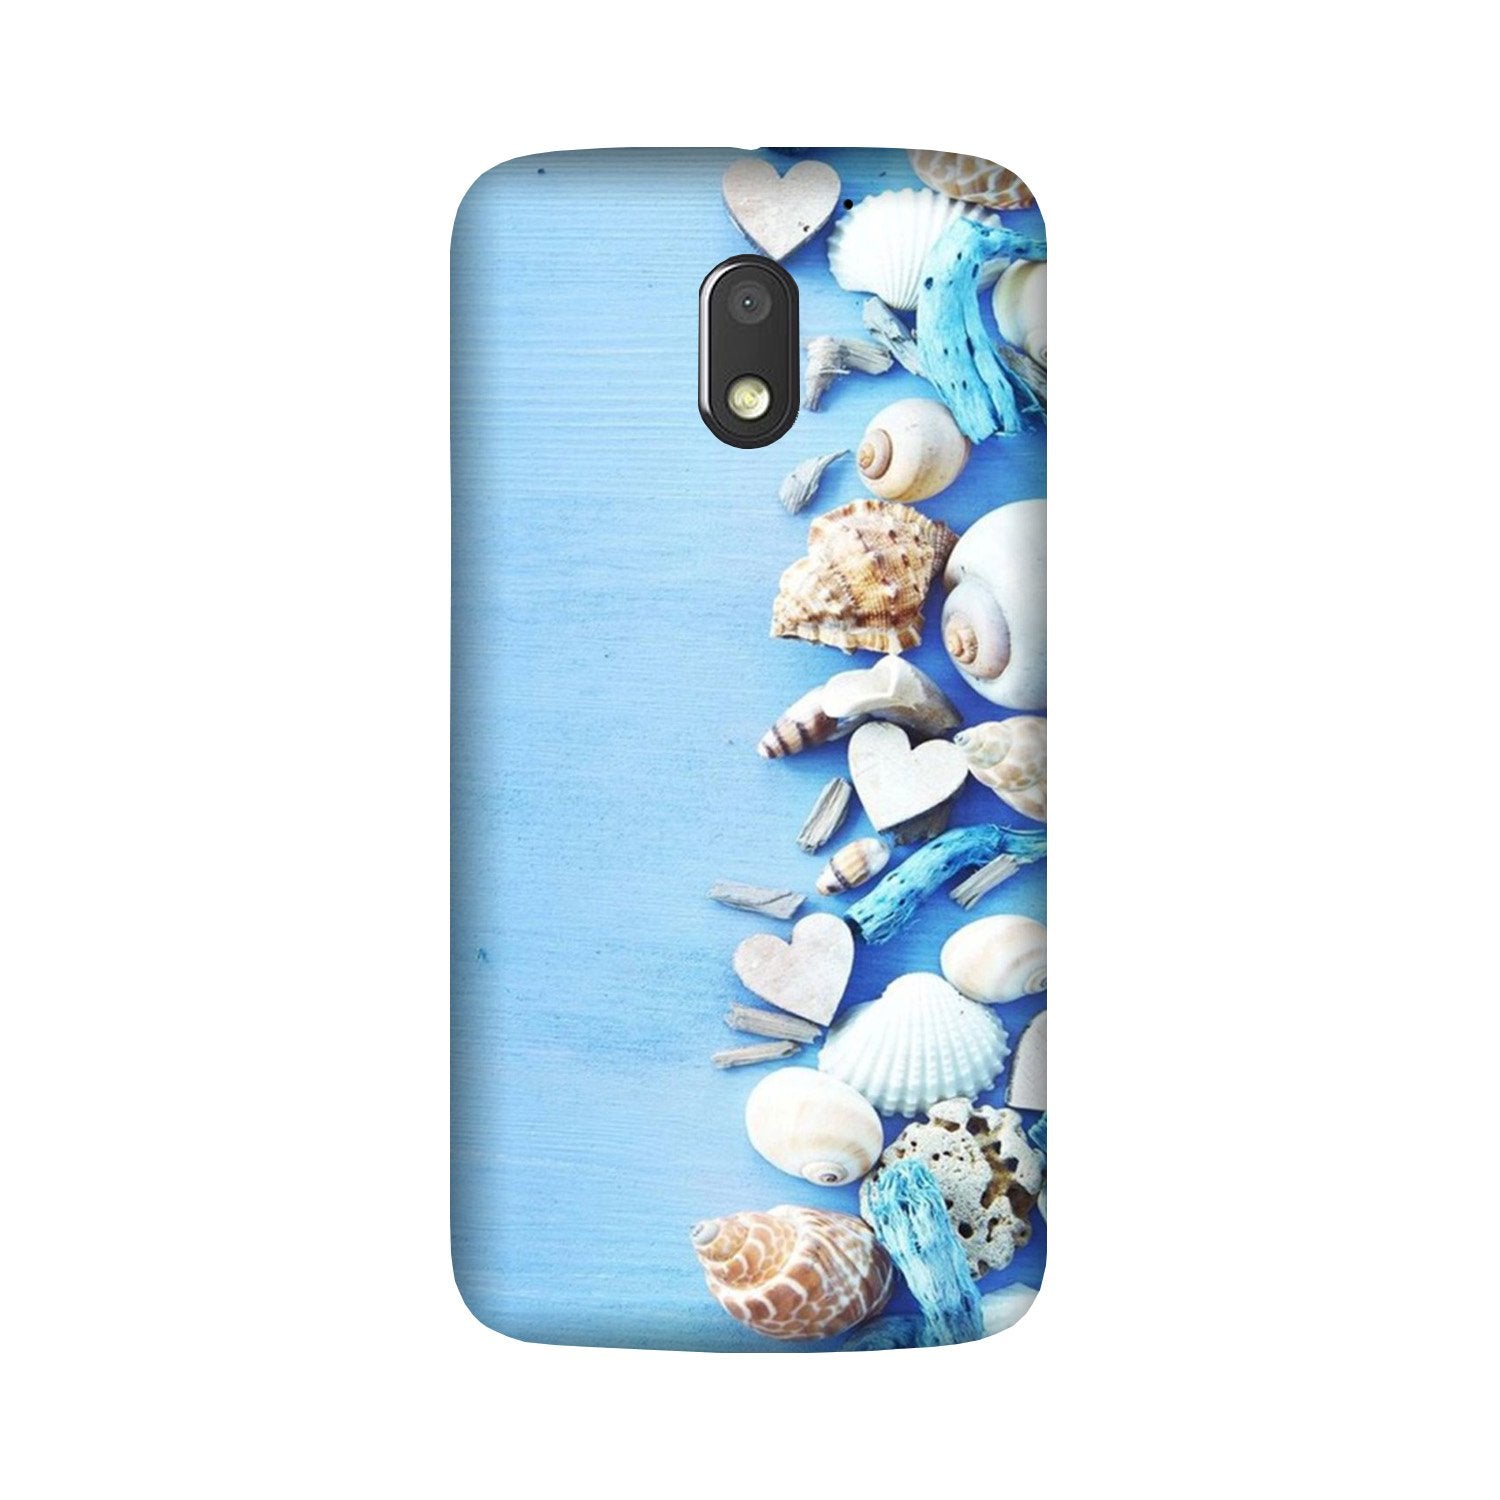 Sea Shells2 Case for Moto G4 Play